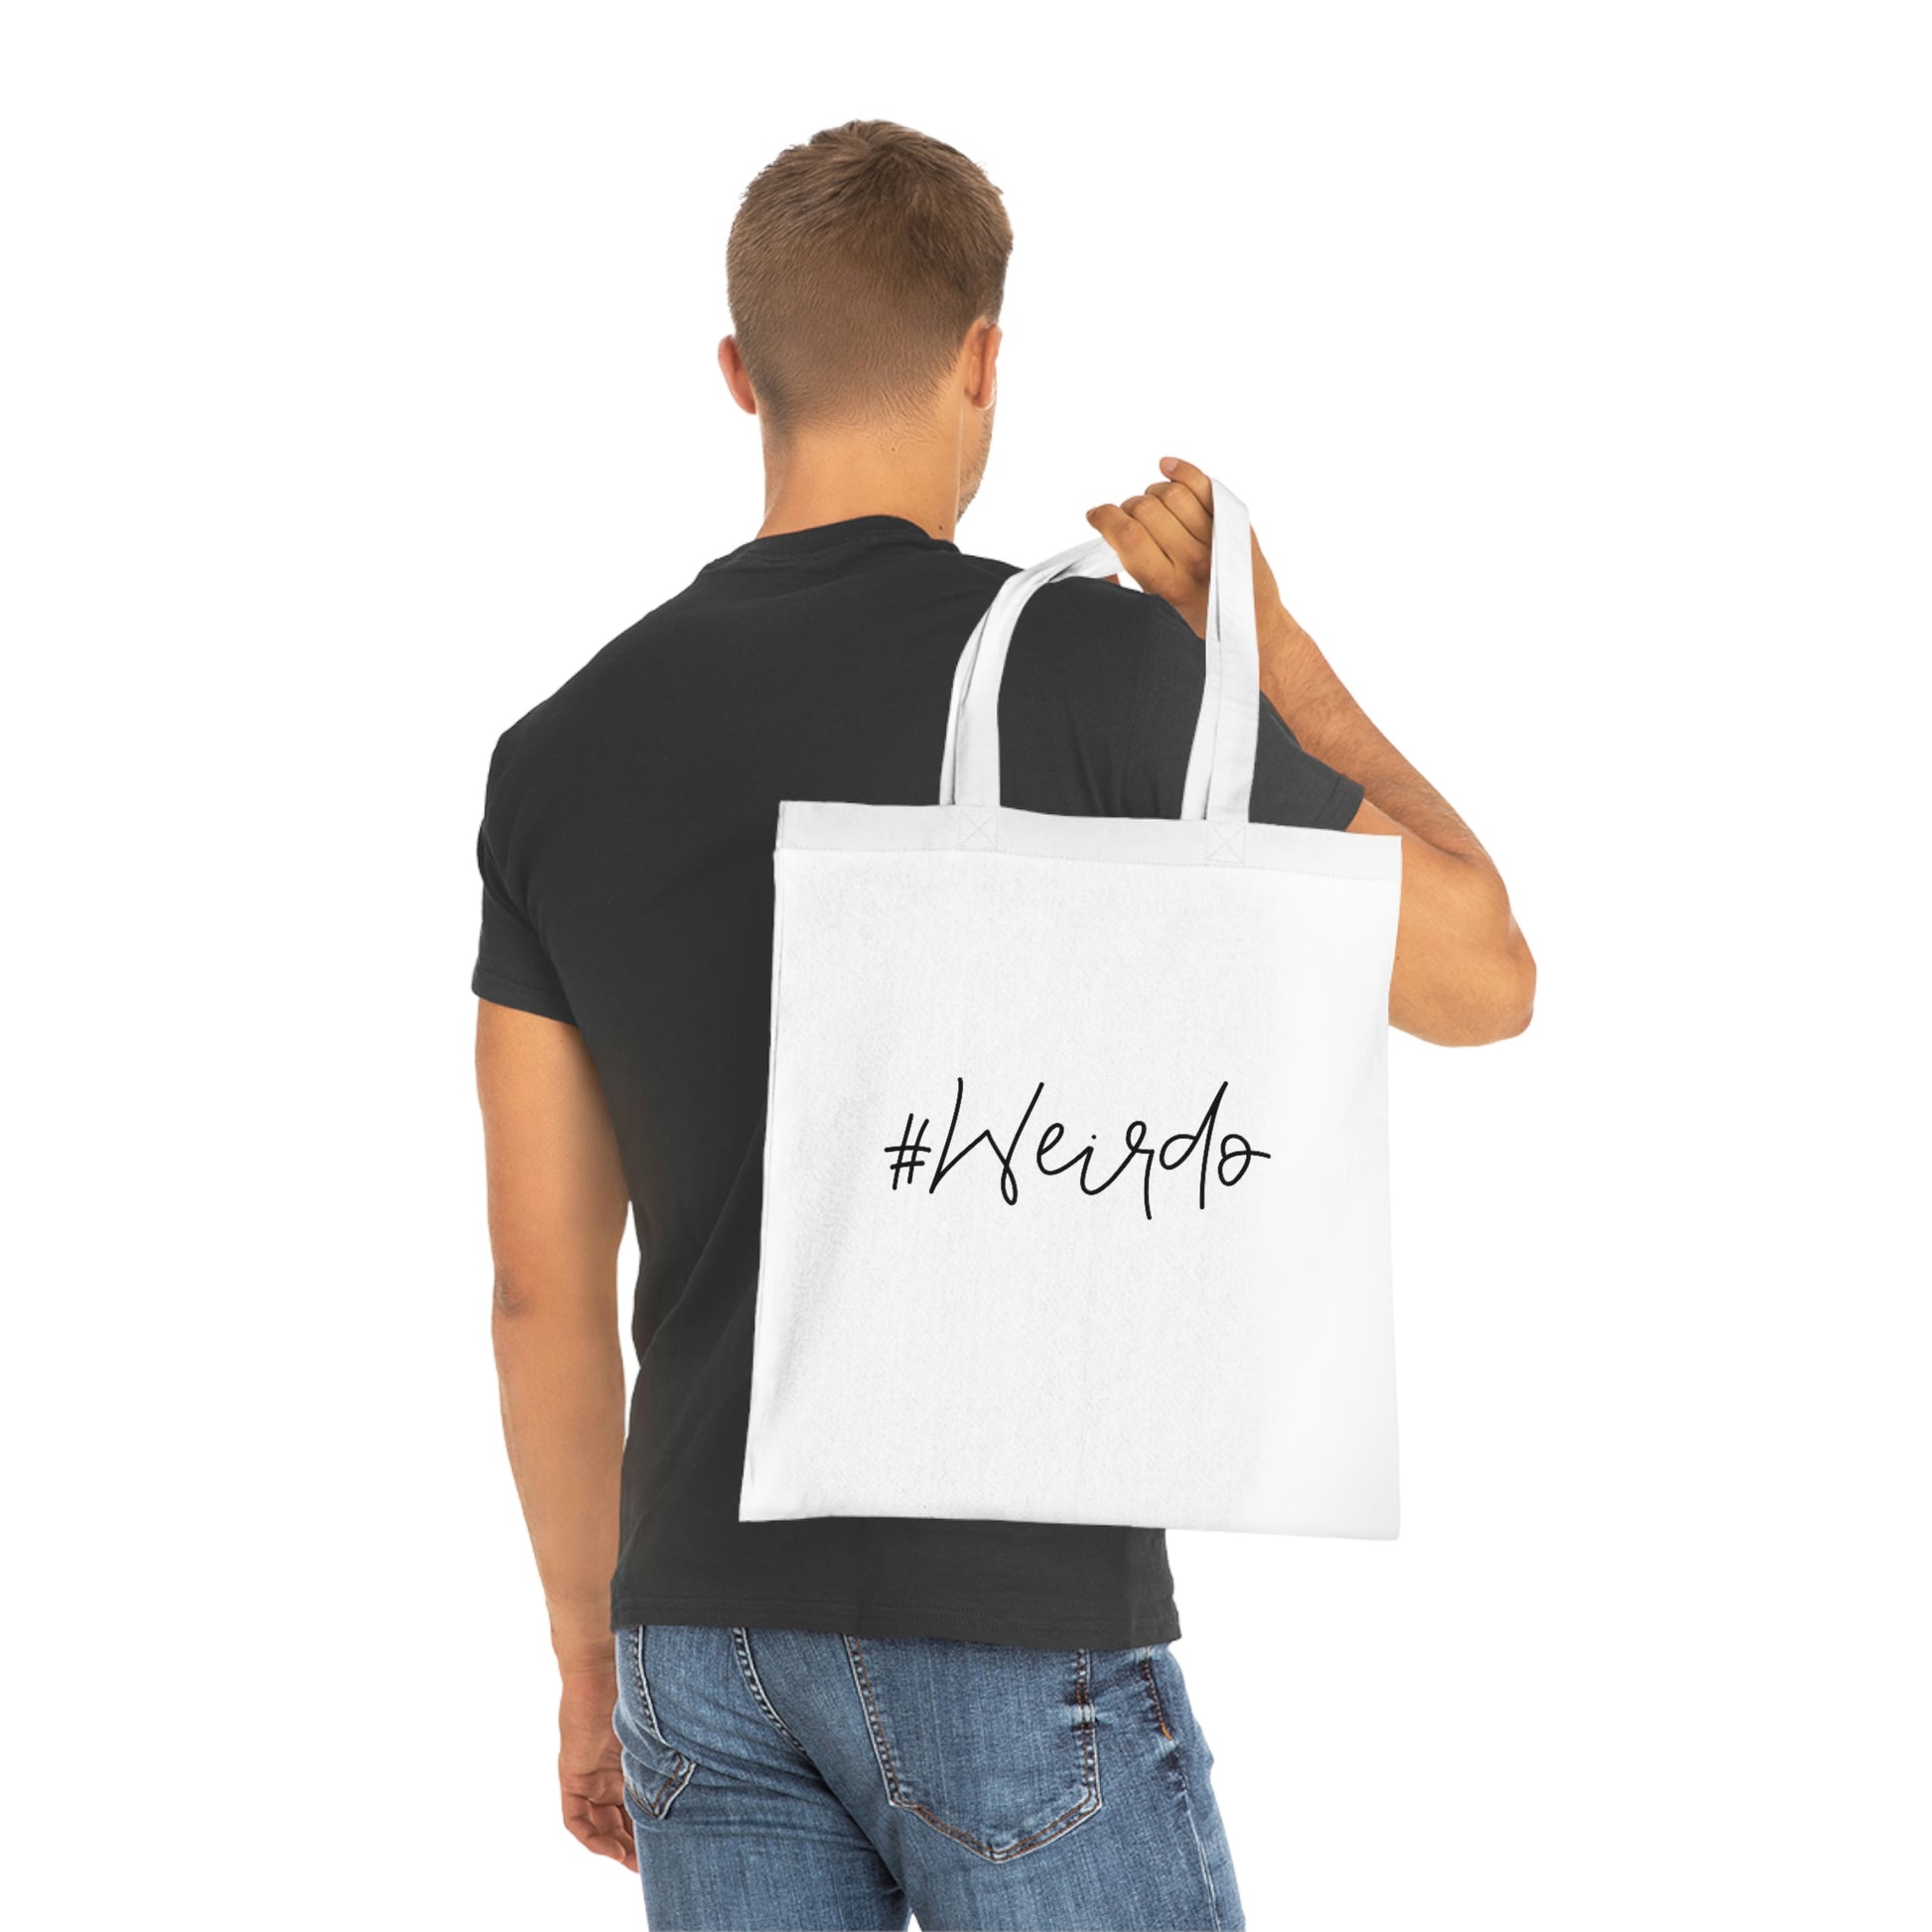 #weirdo | Only if you are a weirdo you will go shopping with this tote bag! This tote bag is 100% cotton and ultra lightweight.